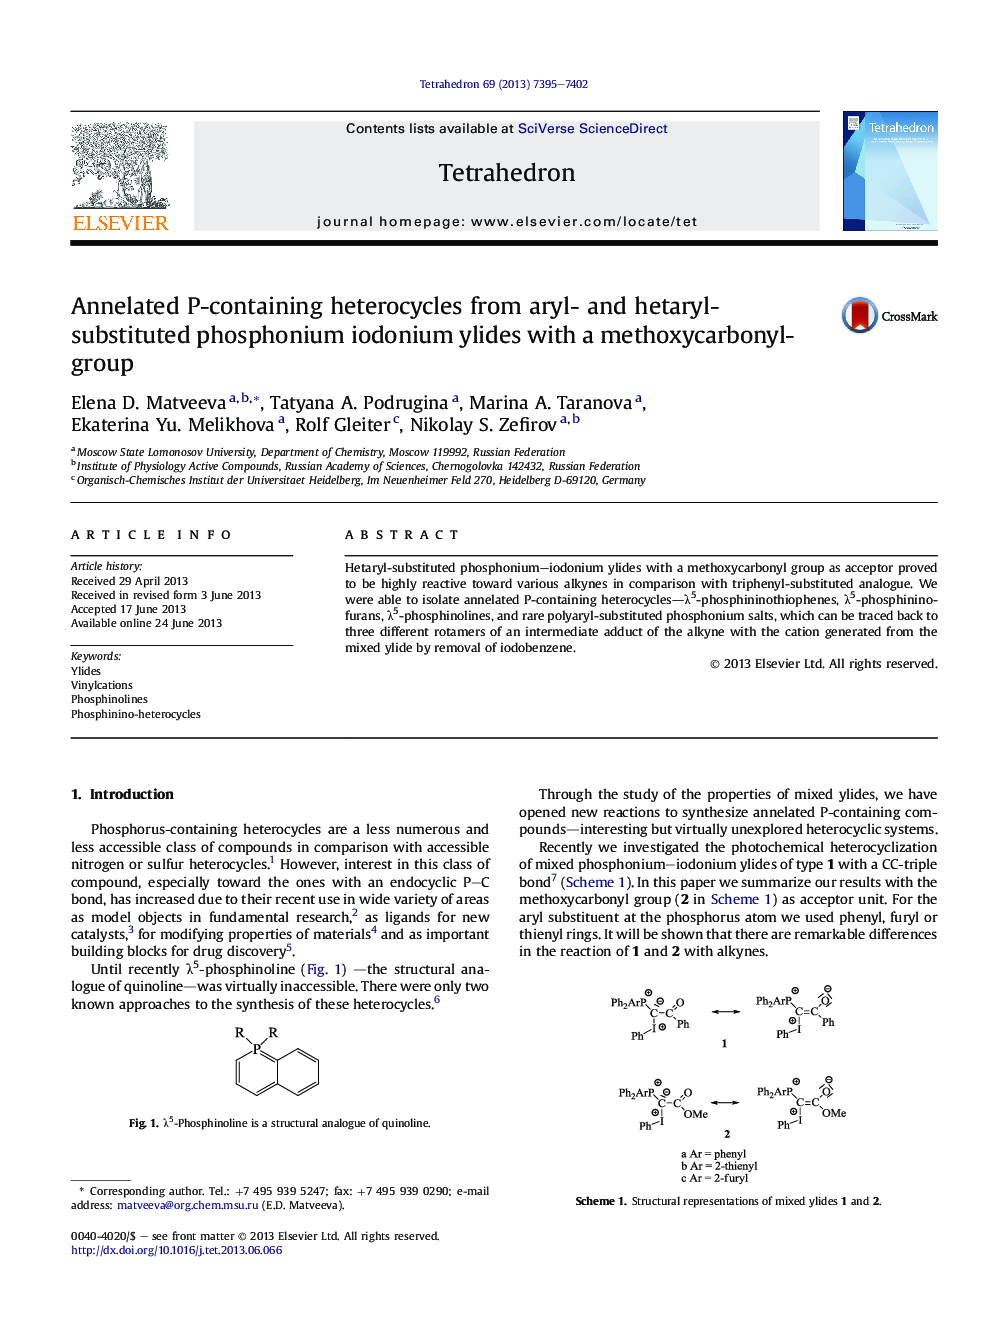 Annelated P-containing heterocycles from aryl- and hetaryl-substituted phosphonium iodonium ylides with a methoxycarbonyl-group